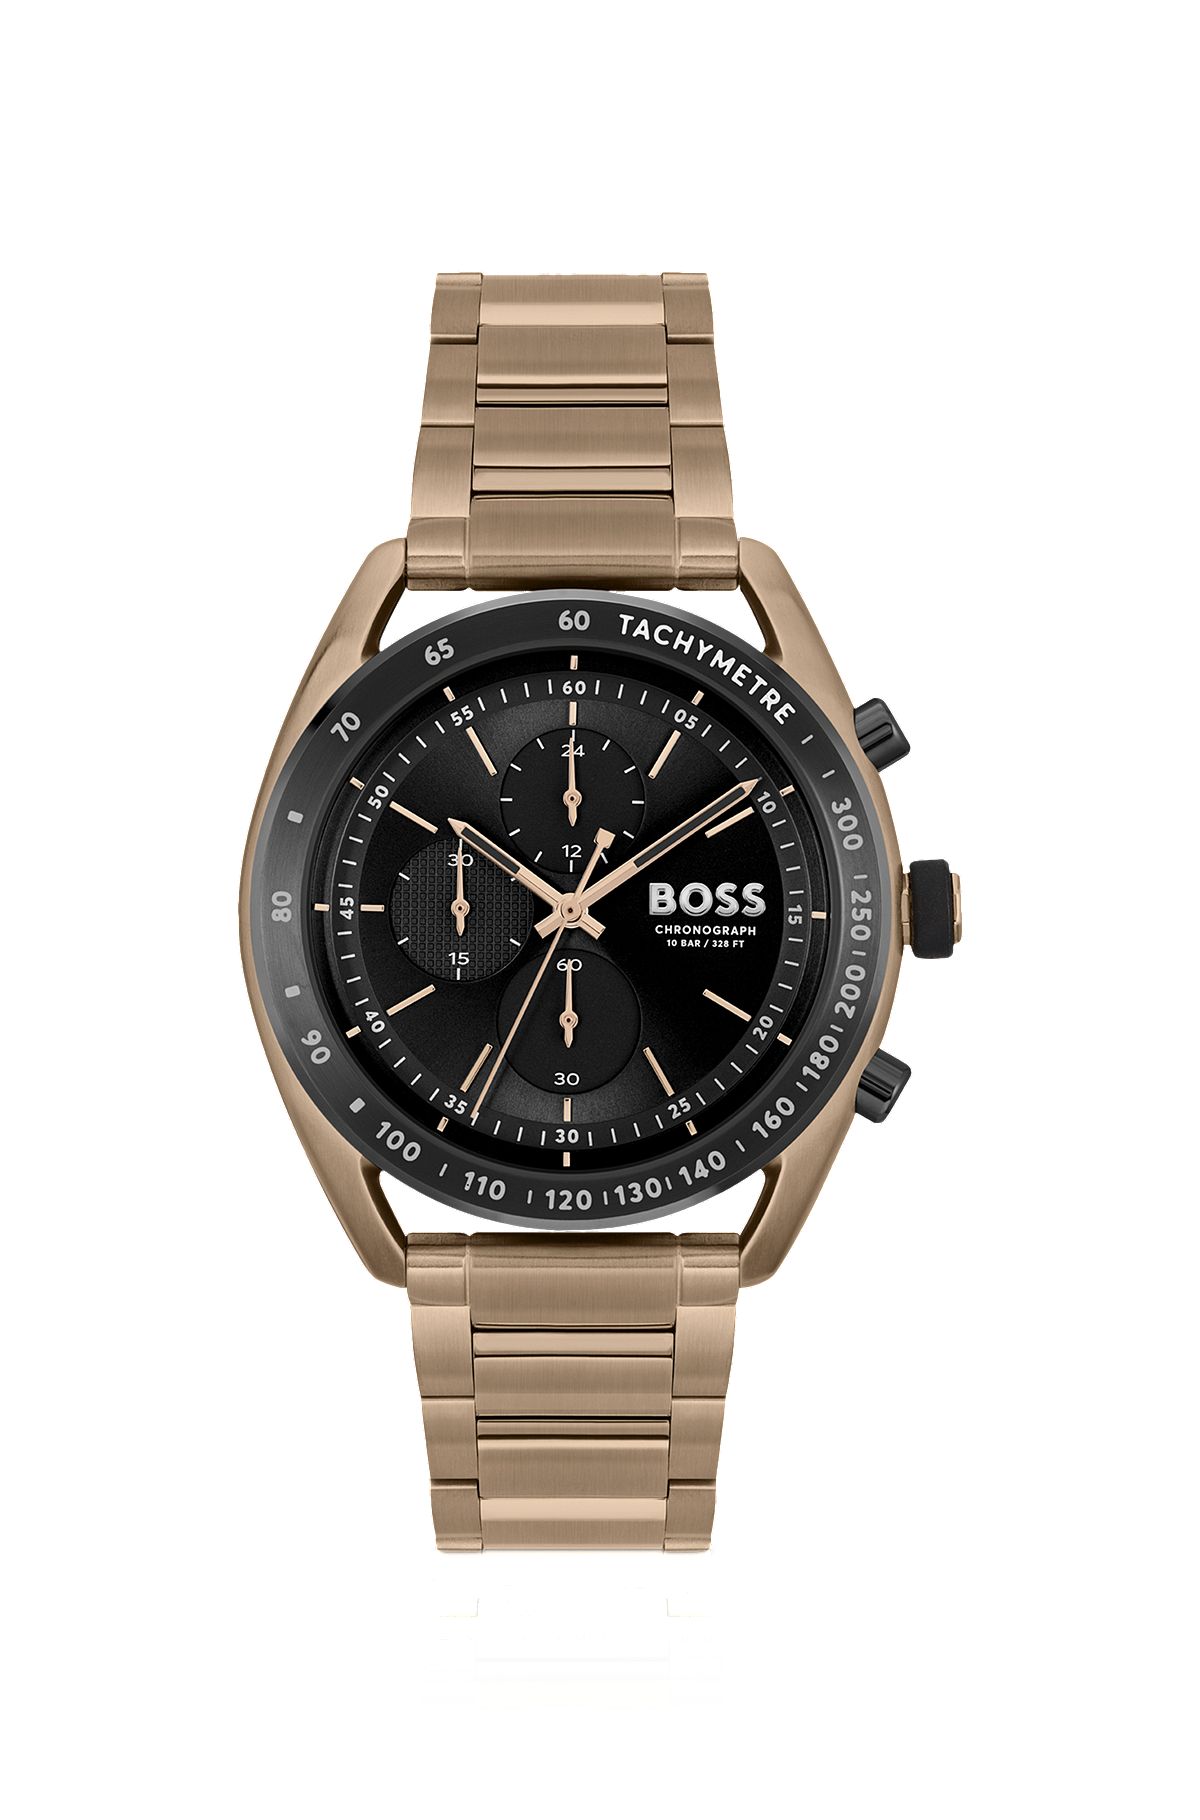 Gold-tone chronograph watch with link bracelet, Gold